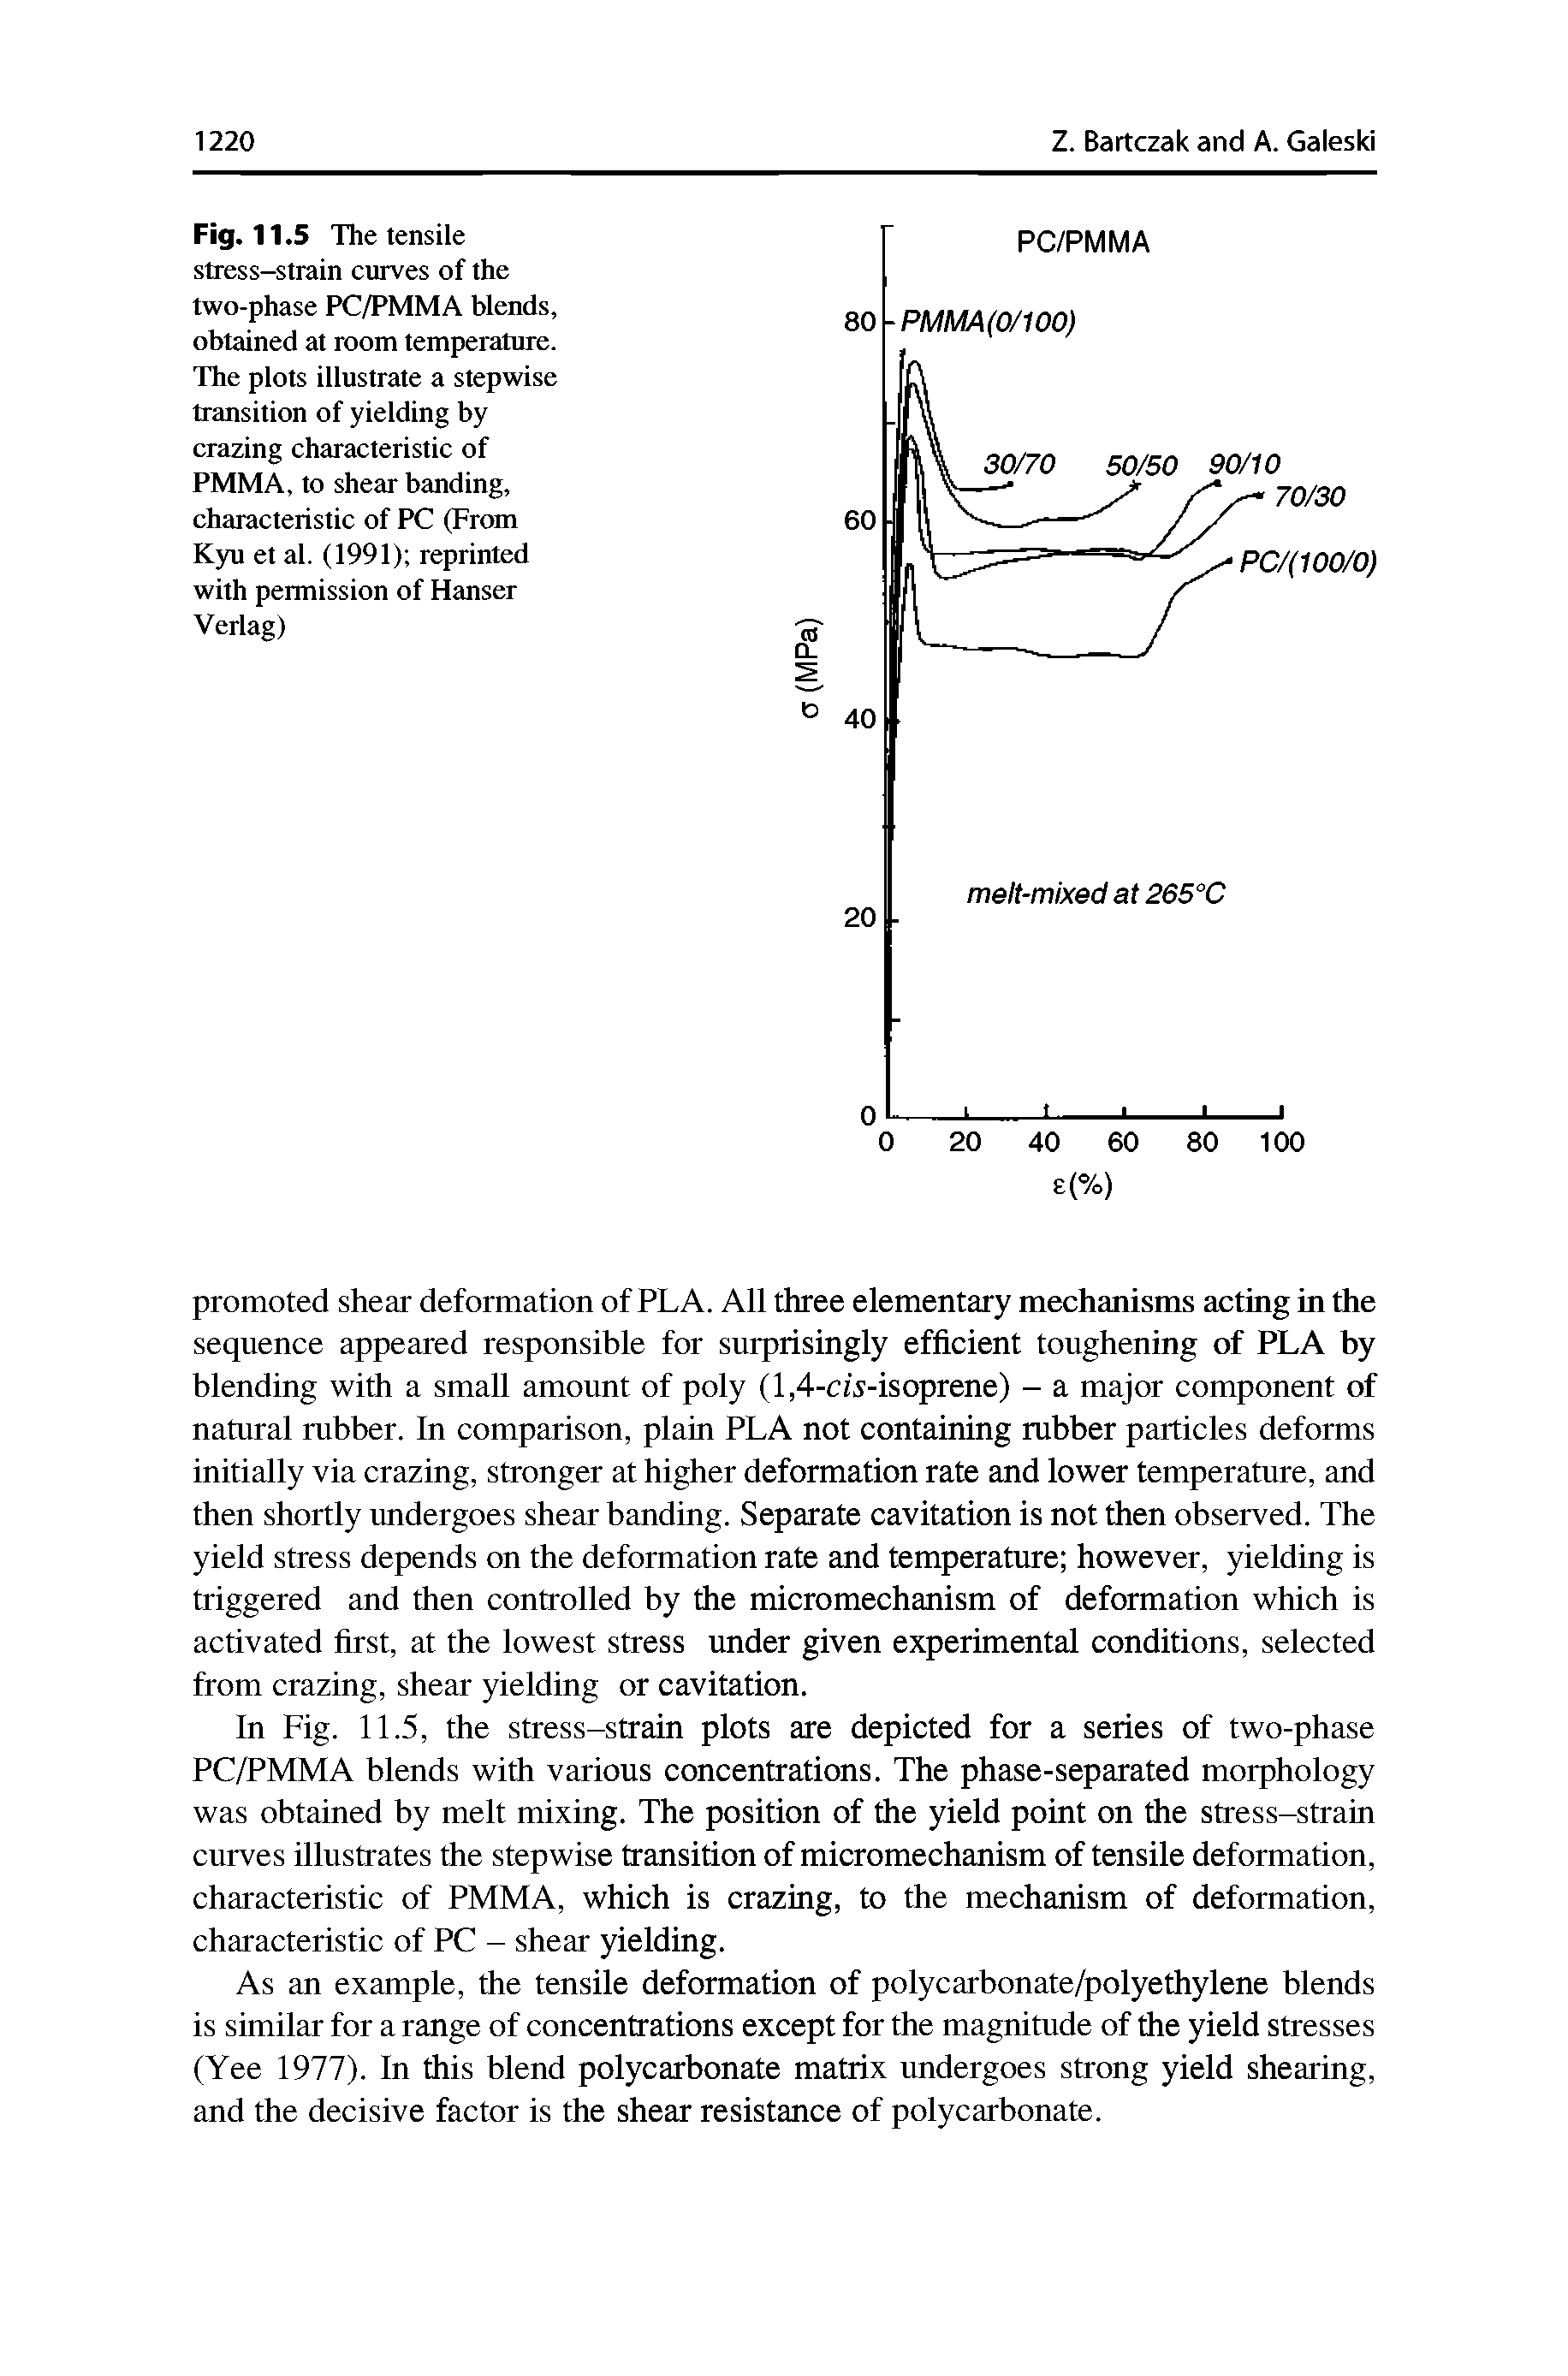 Fig. 11.5 The tensile stress-strain curves of the two-phase PC/PMMA blends, obtained at room temperature. The plots illustrate a stepwise transition of yielding by crazing characteristic of PMMA, to shear banding, characteristic of PC (From Kyu et al. (1991) reprinted with permission of Hanser Verlag)...